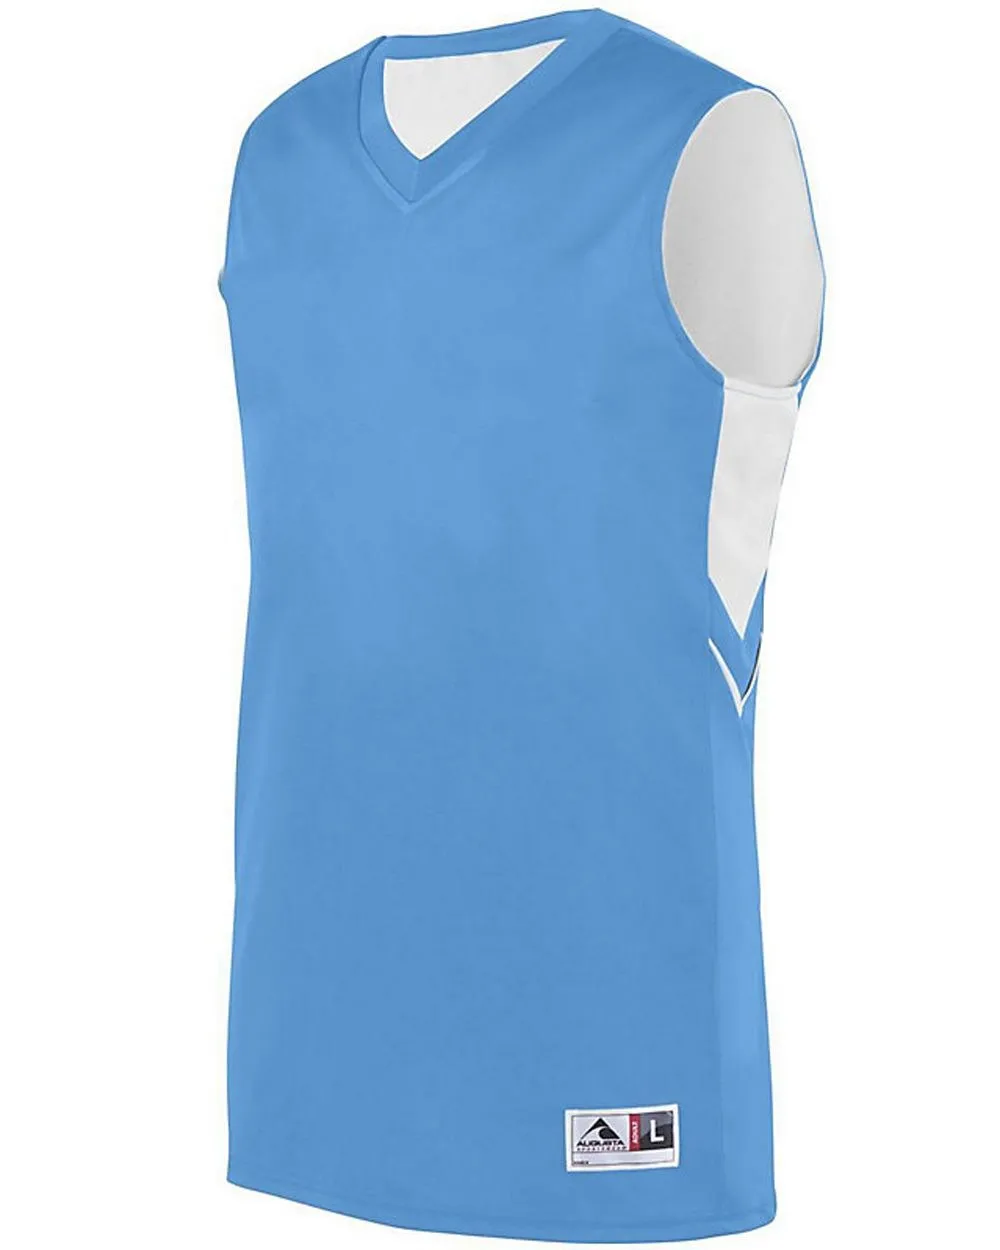 where to buy reversible basketball jerseys